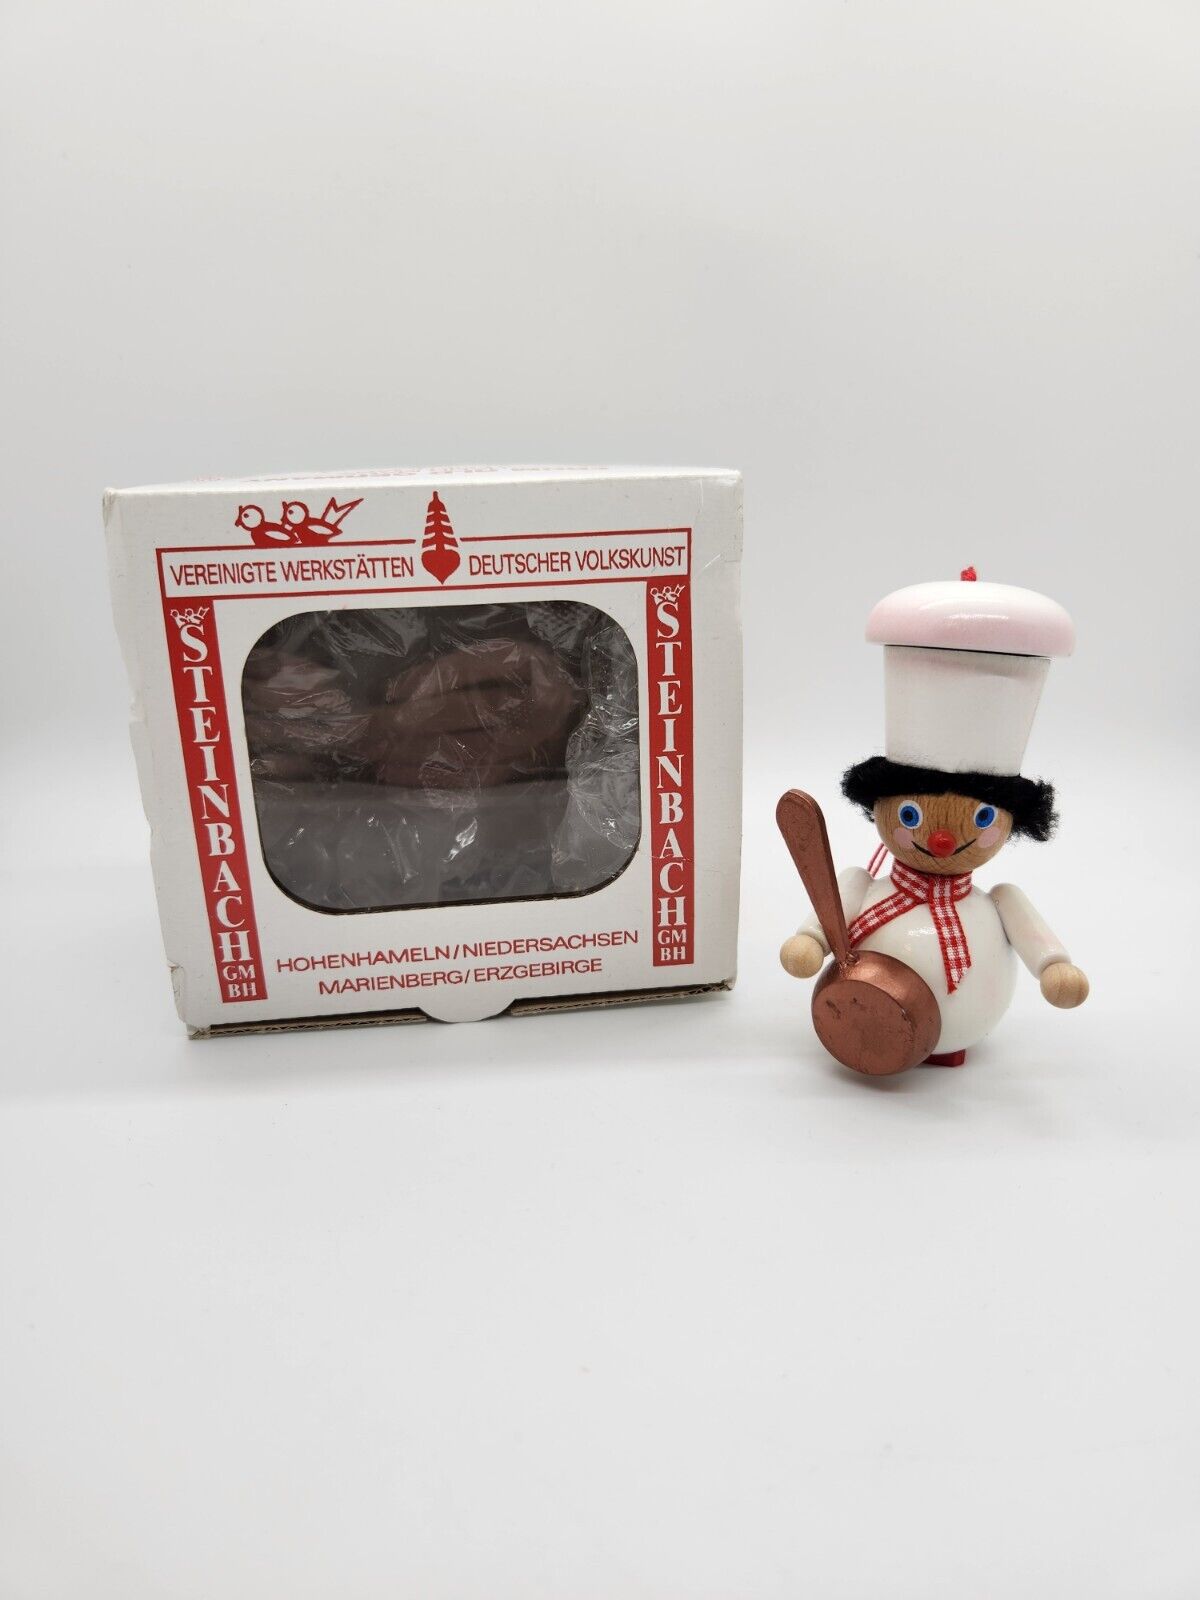 Steinbach Handmade Ornament Chef With Pan 4